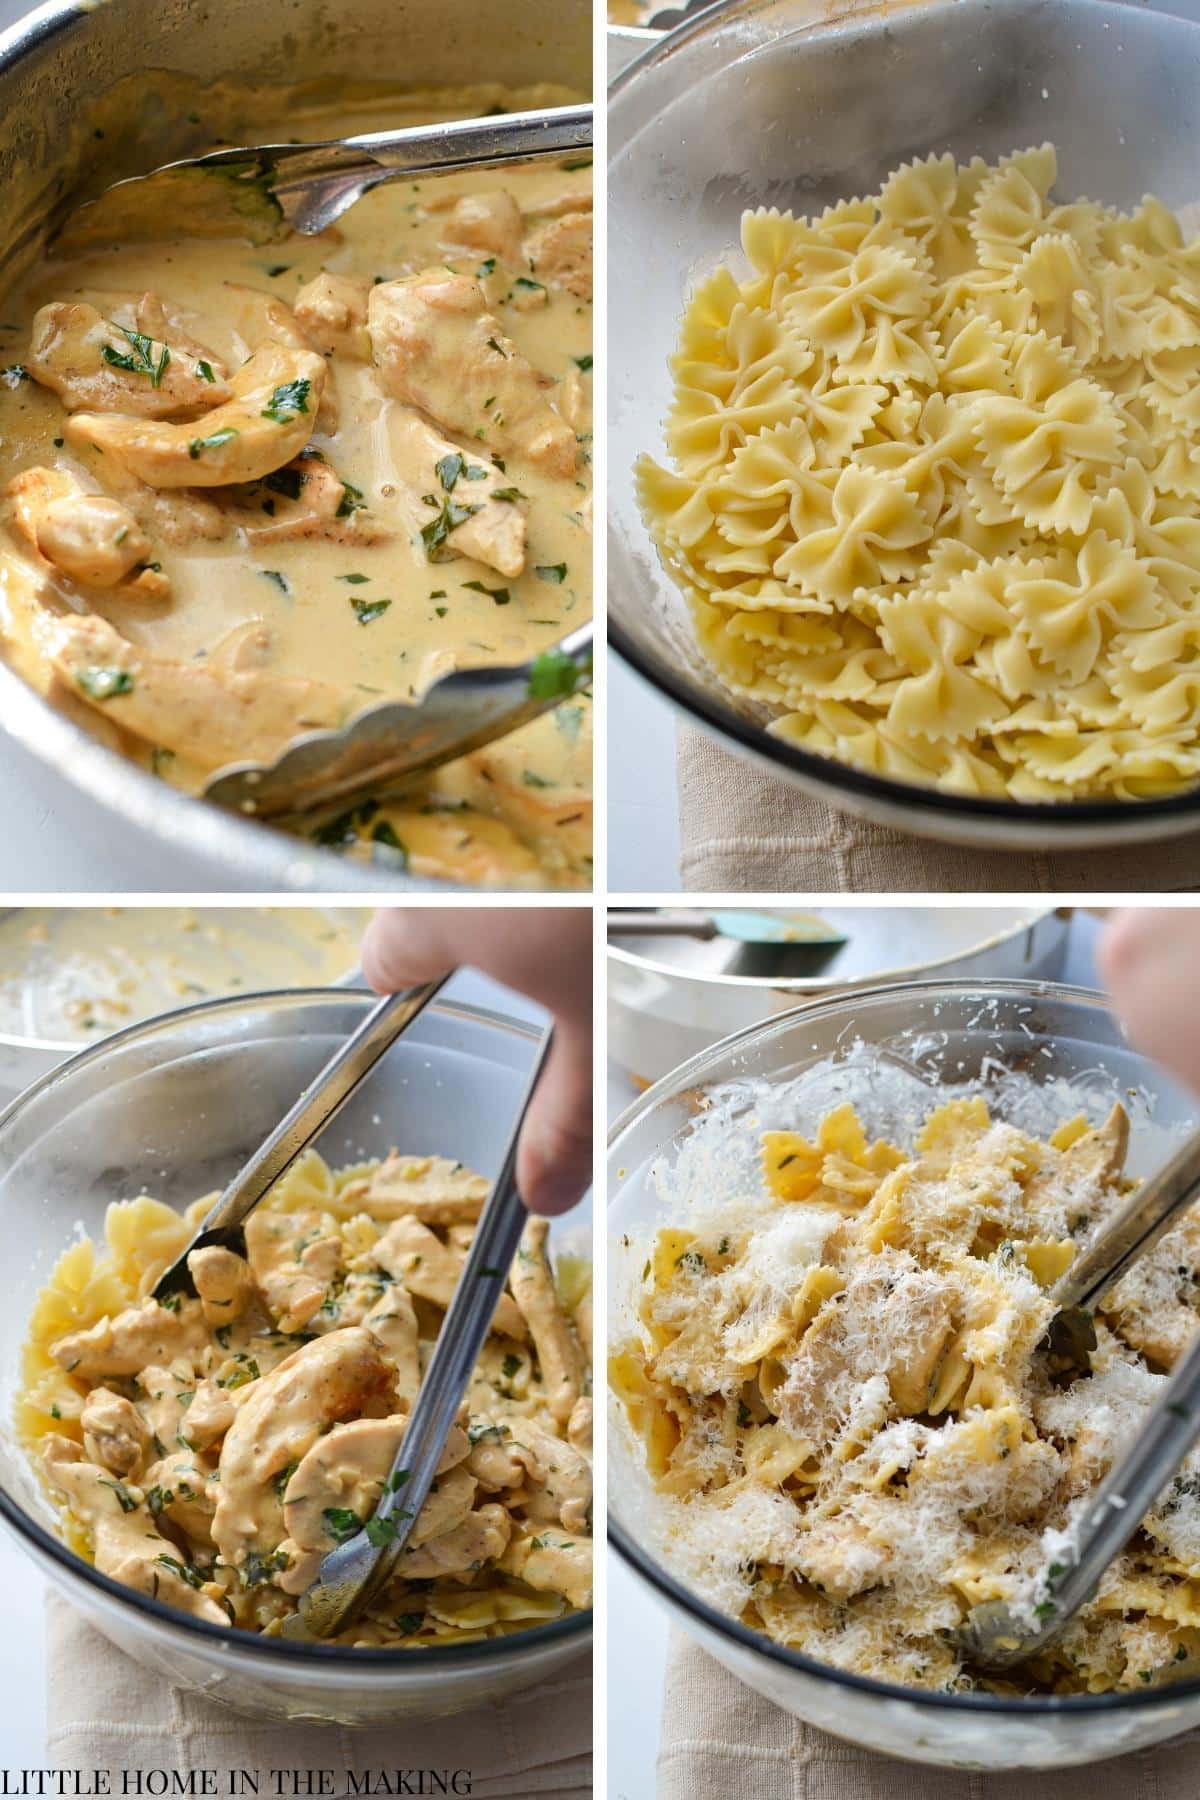 Combining chicken, sauce and pasta to make a delicious main dish.